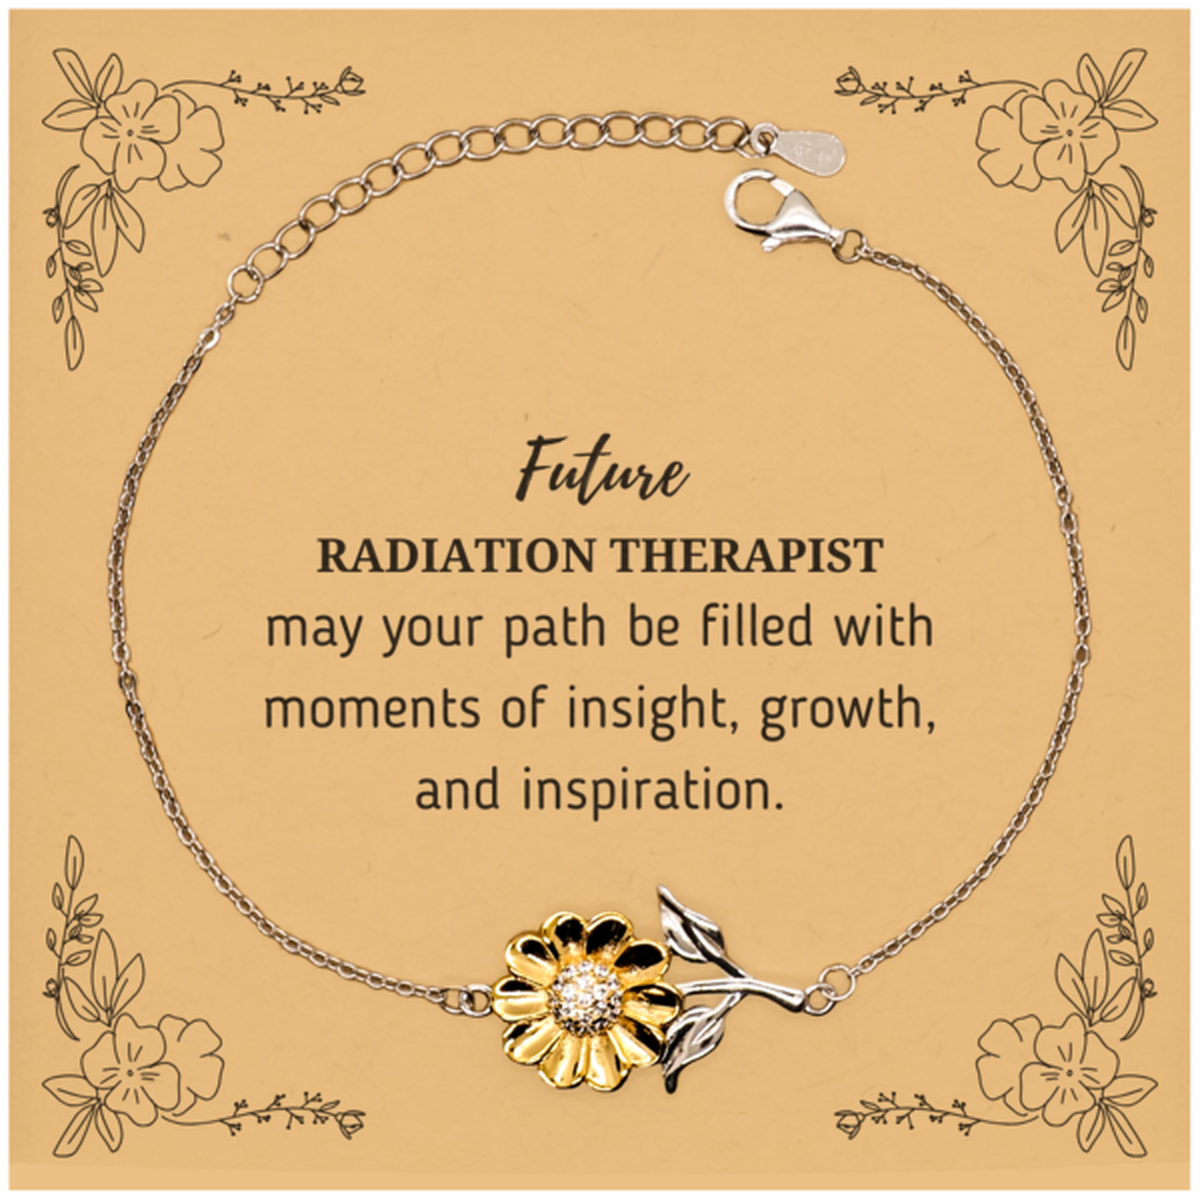 Future Radiation Therapist Gifts, May your path be filled with moments of insight, Graduation Gifts for New Radiation Therapist, Christmas Unique Sunflower Bracelet For Men, Women, Friends